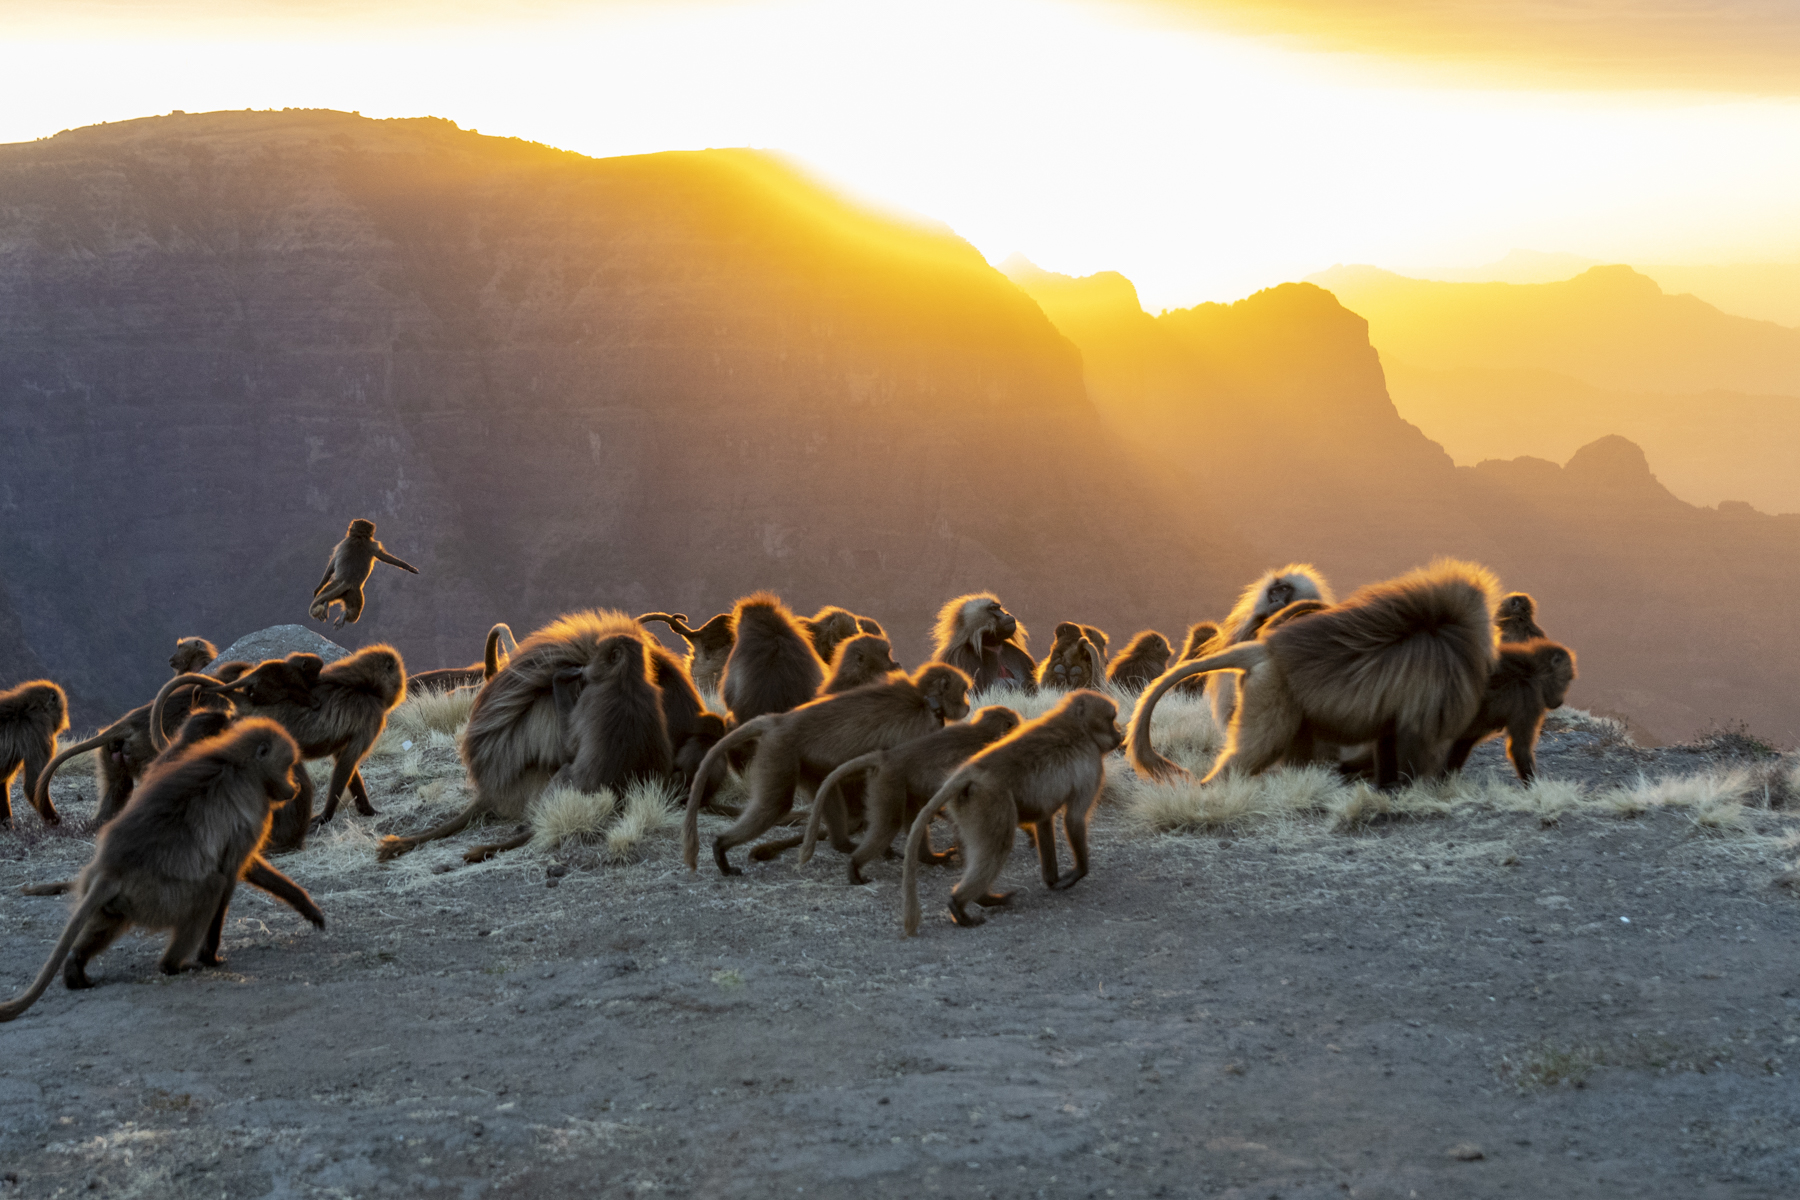 Geladas at sunset. There is still a chance to groom or play... (image by Mark Beaman)